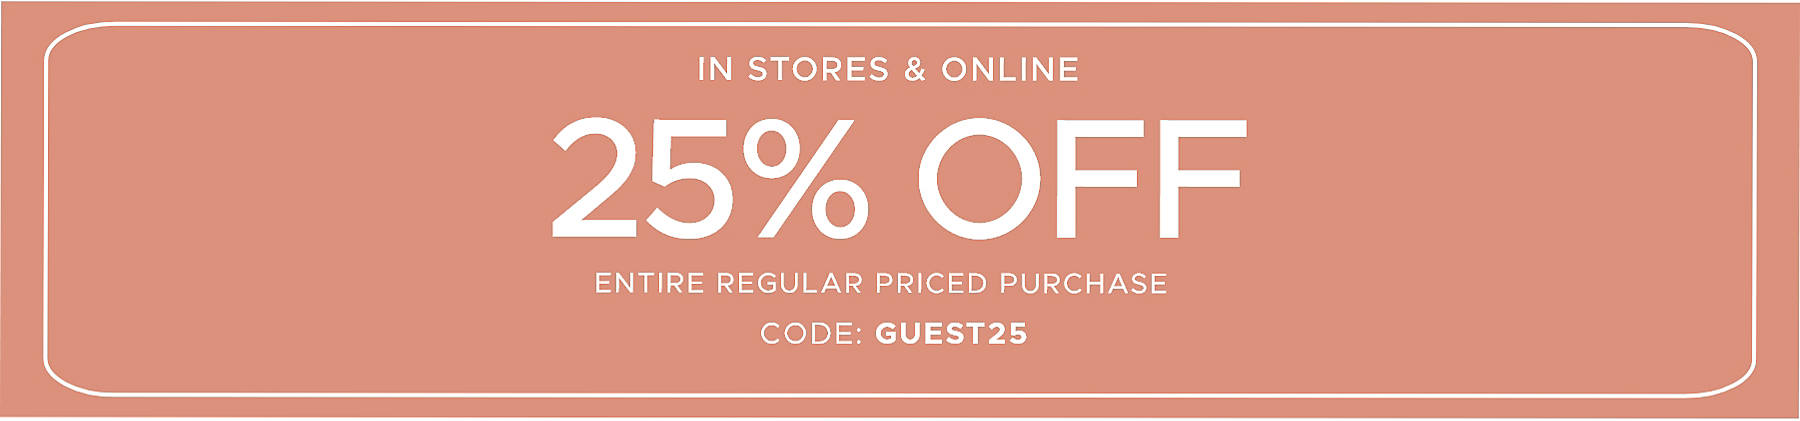 25% off Entire Regular Priced Purchase code: GUEST25